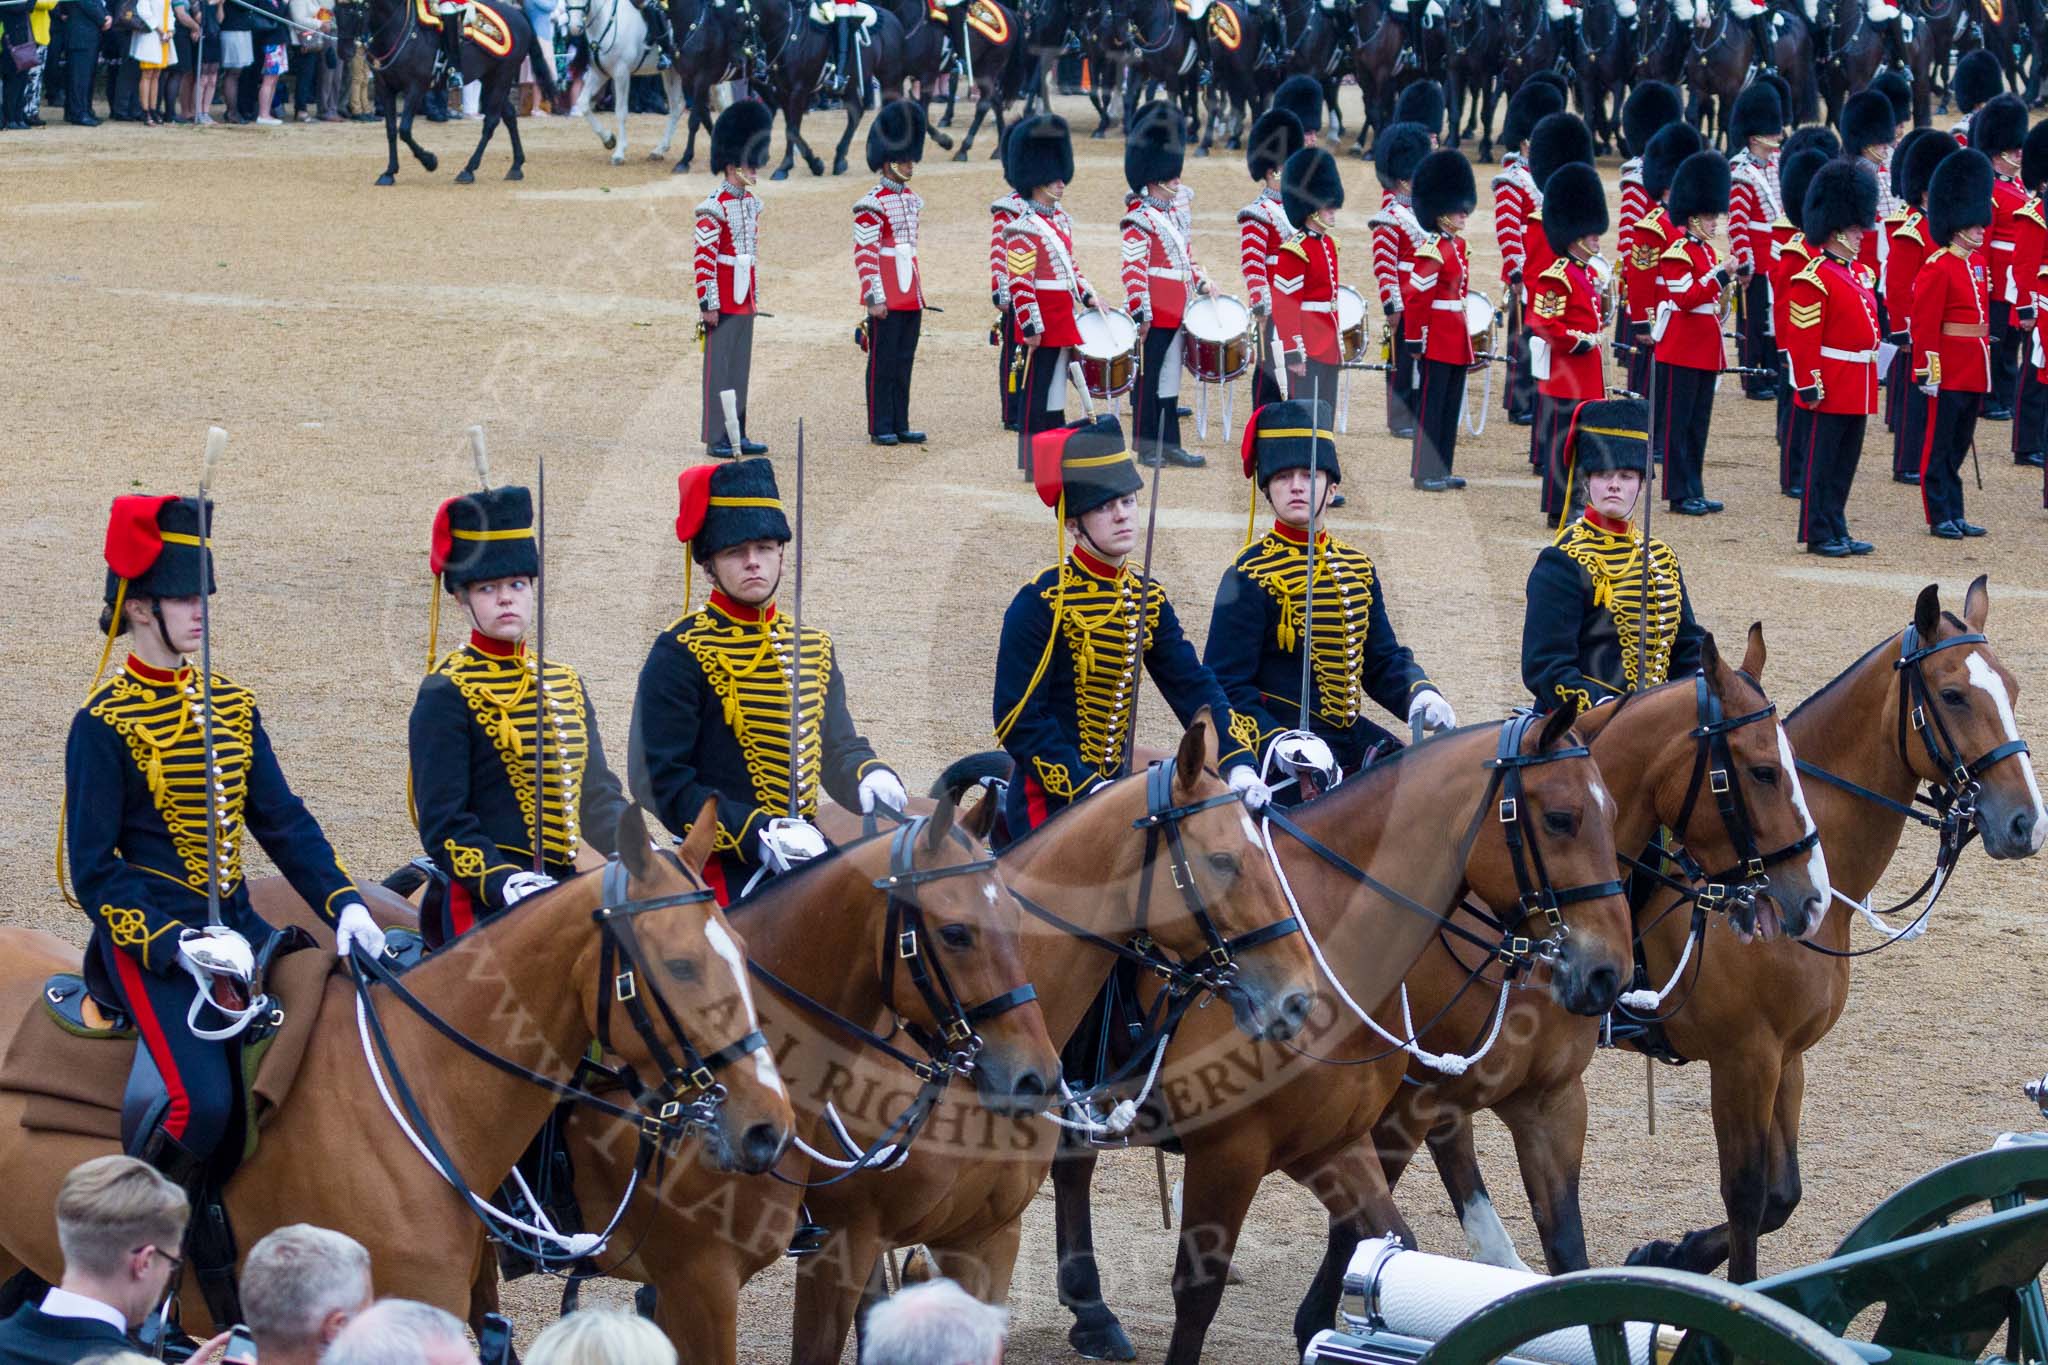 Trooping the Colour 2015. Image #537, 13 June 2015 11:53 Horse Guards Parade, London, UK